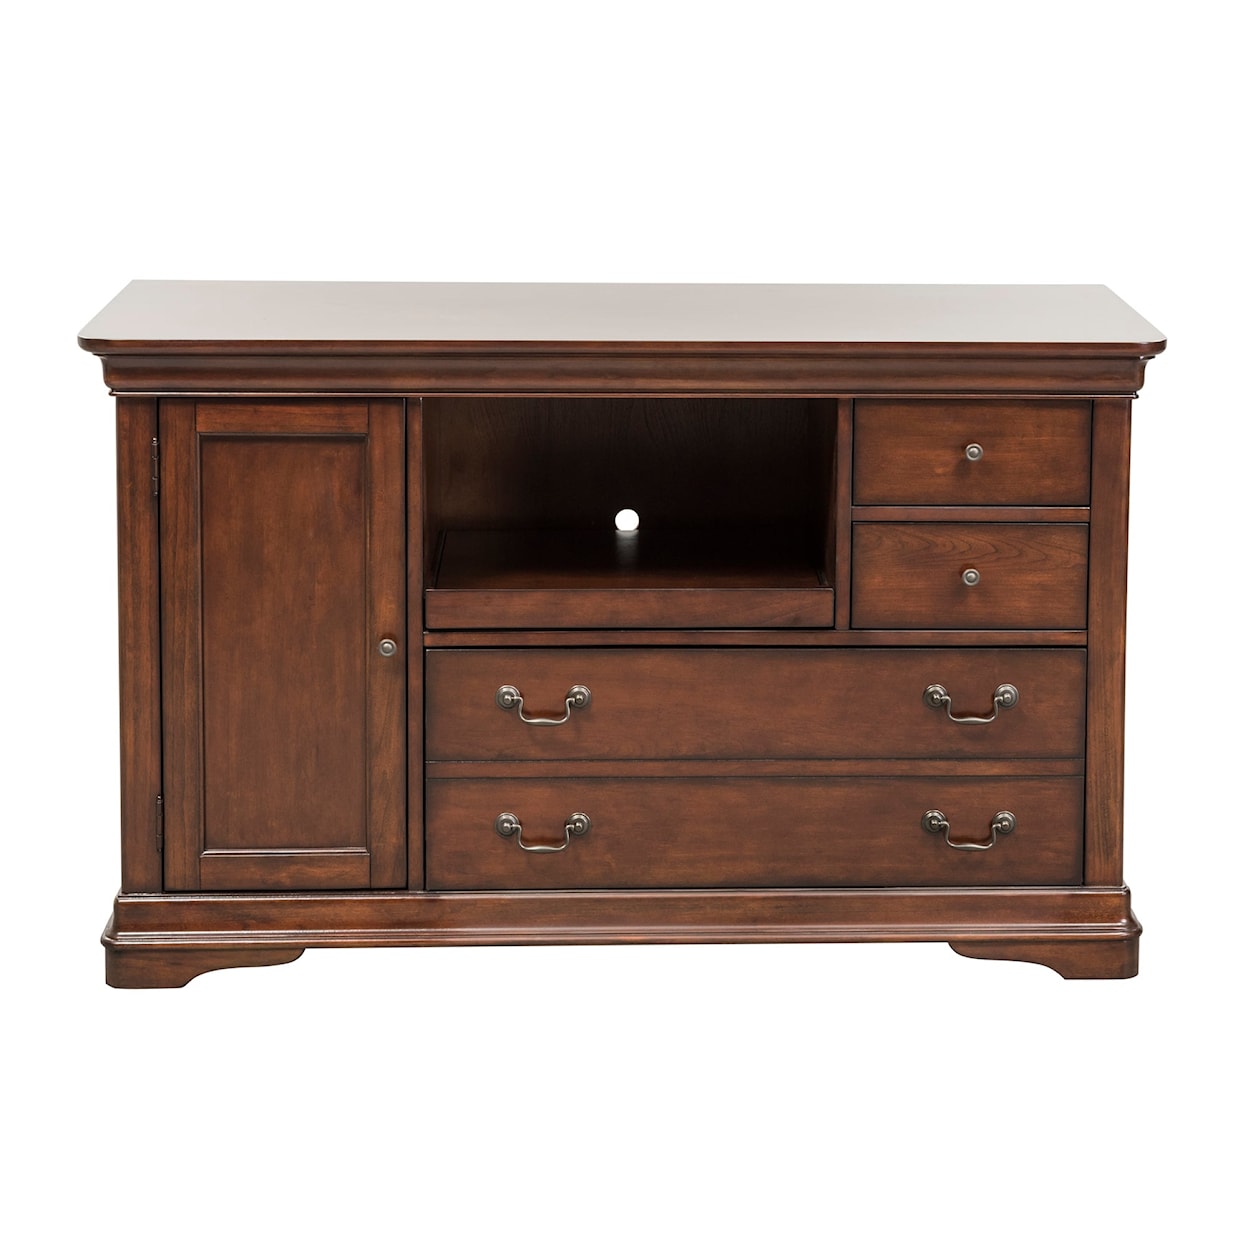 Libby Brookview Credenza